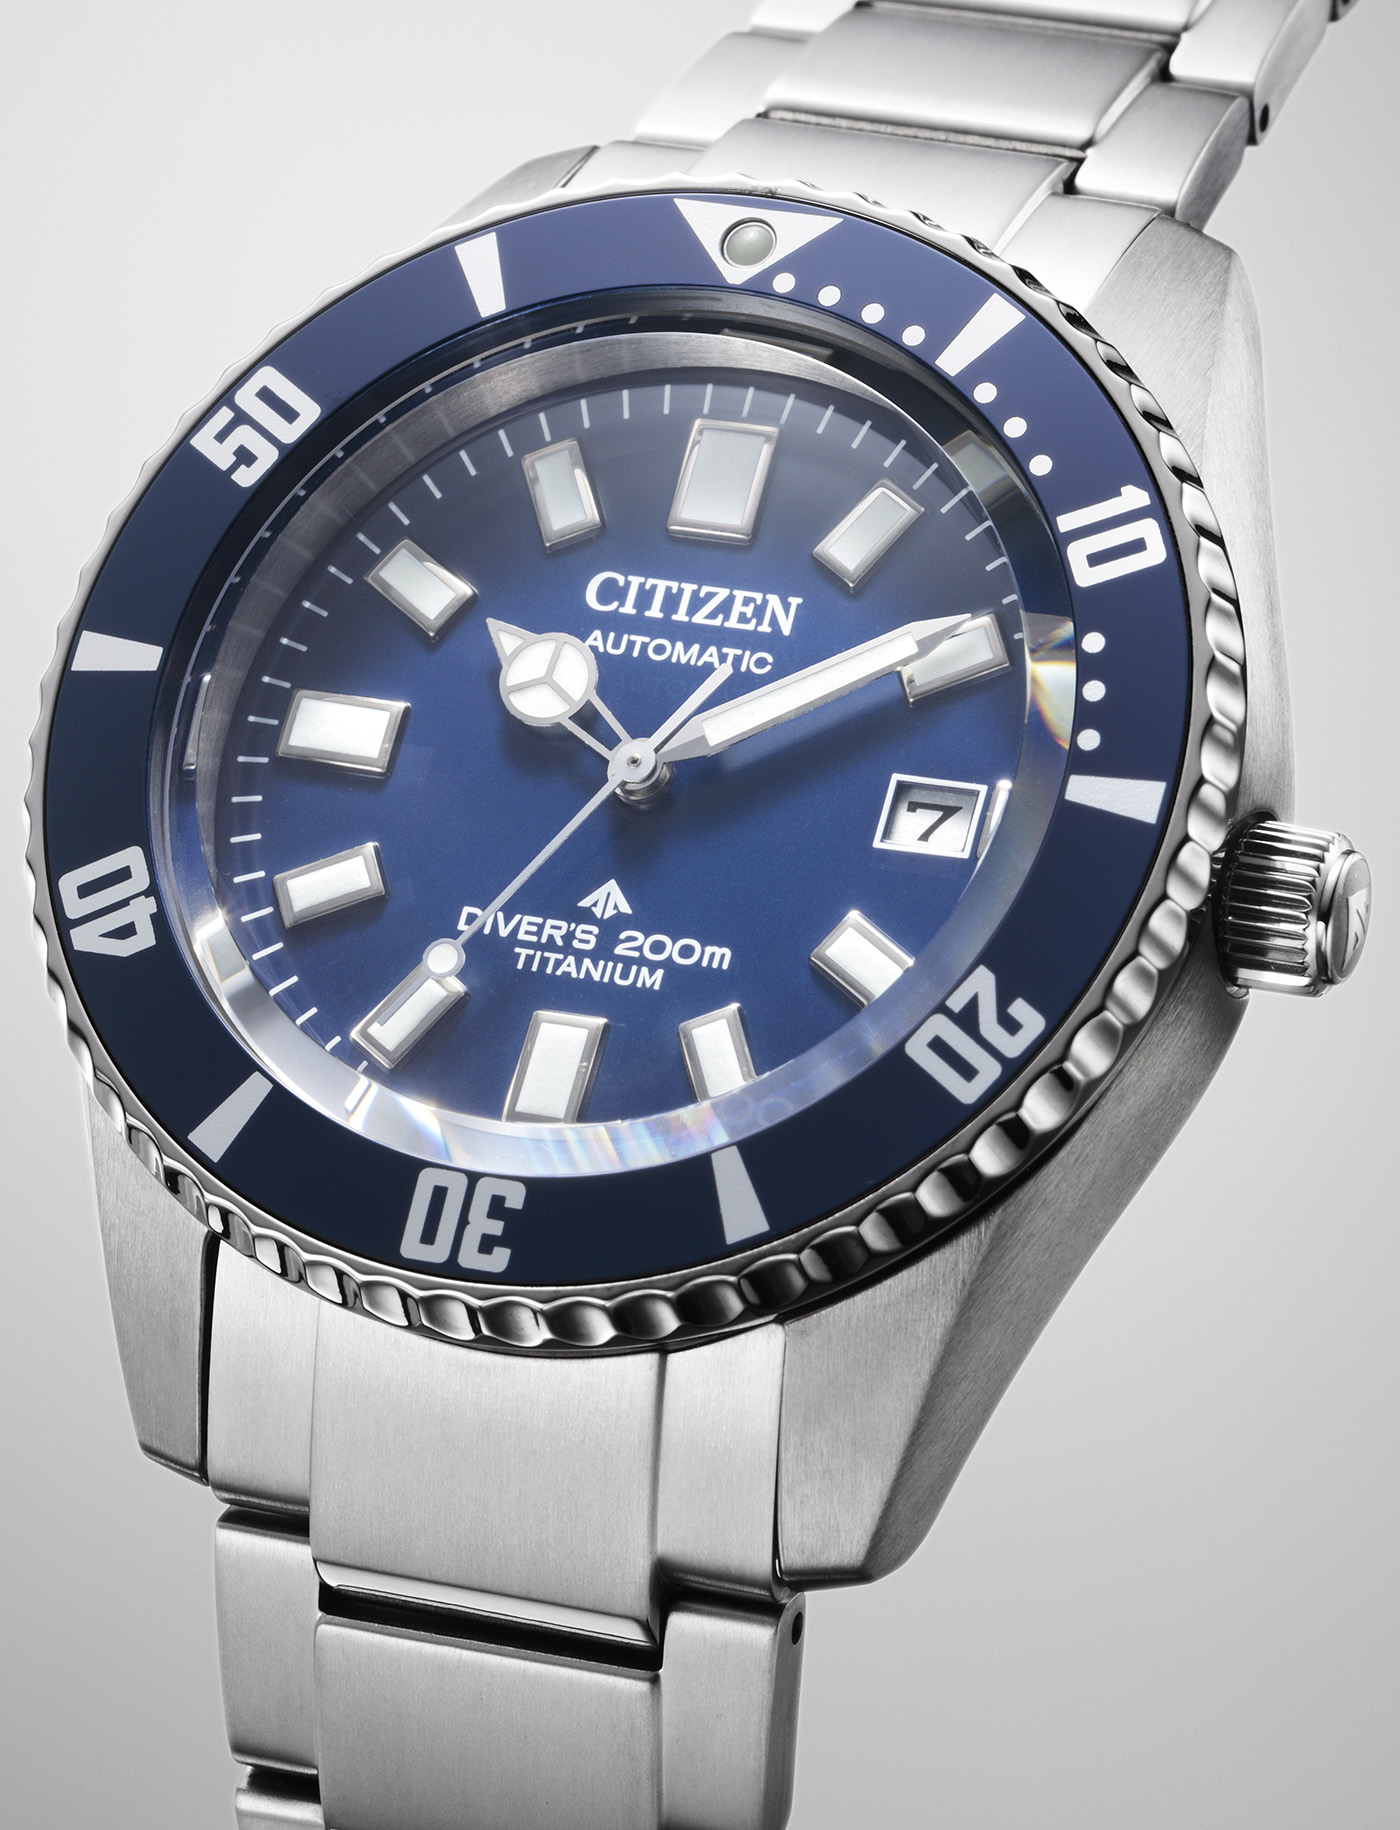 Explore Enduring Dive Watch Style With The Citizen Promaster 